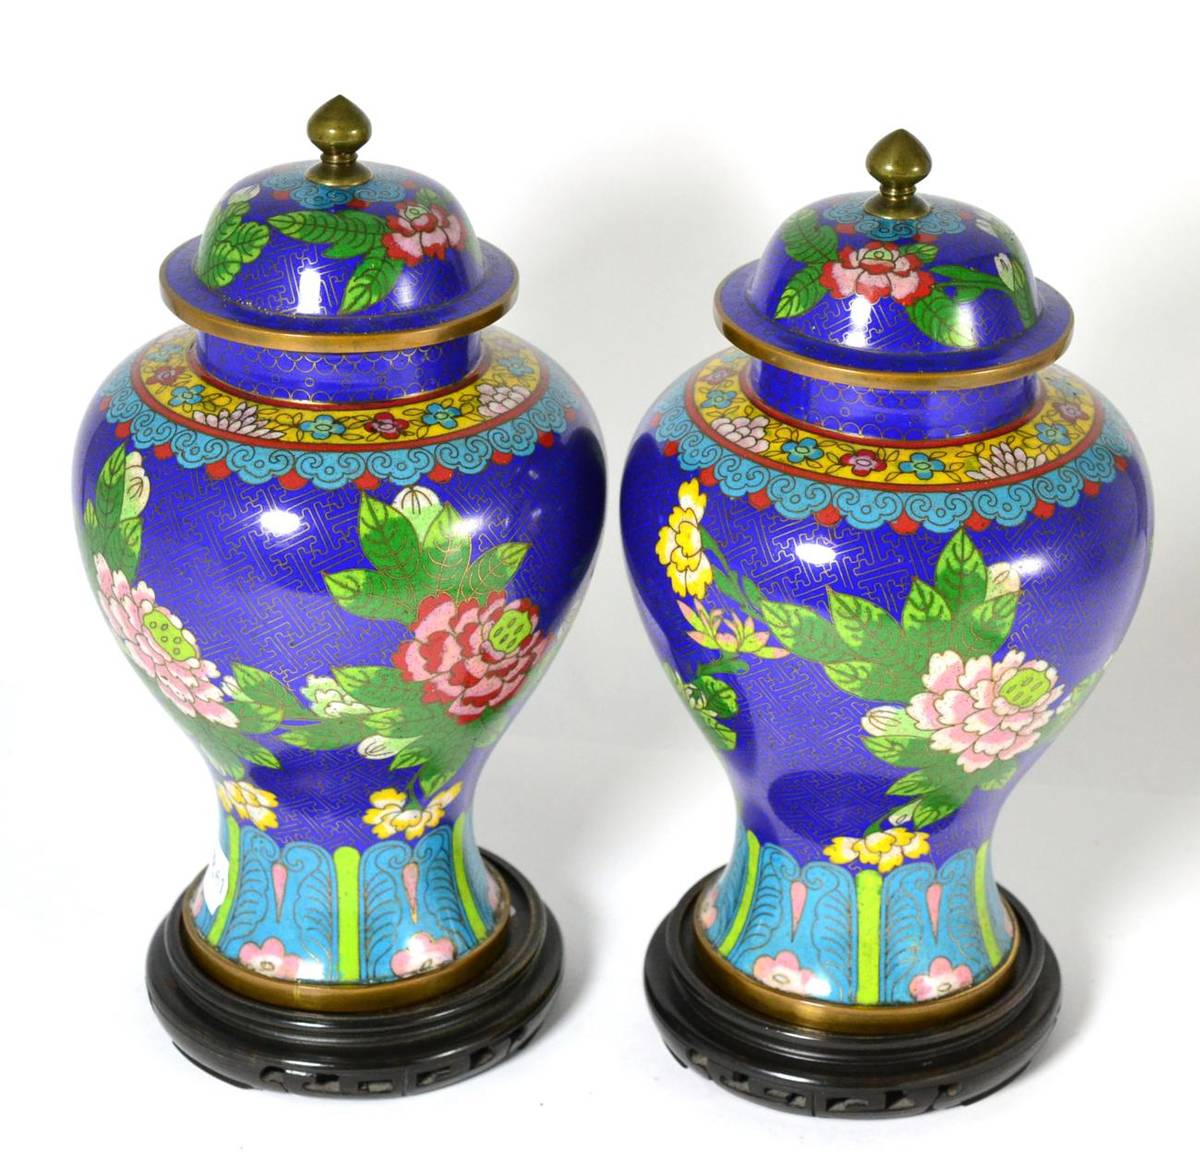 Lot 255 - A pair of Chinese cloisonne enamel vases and covers with hardwood stands